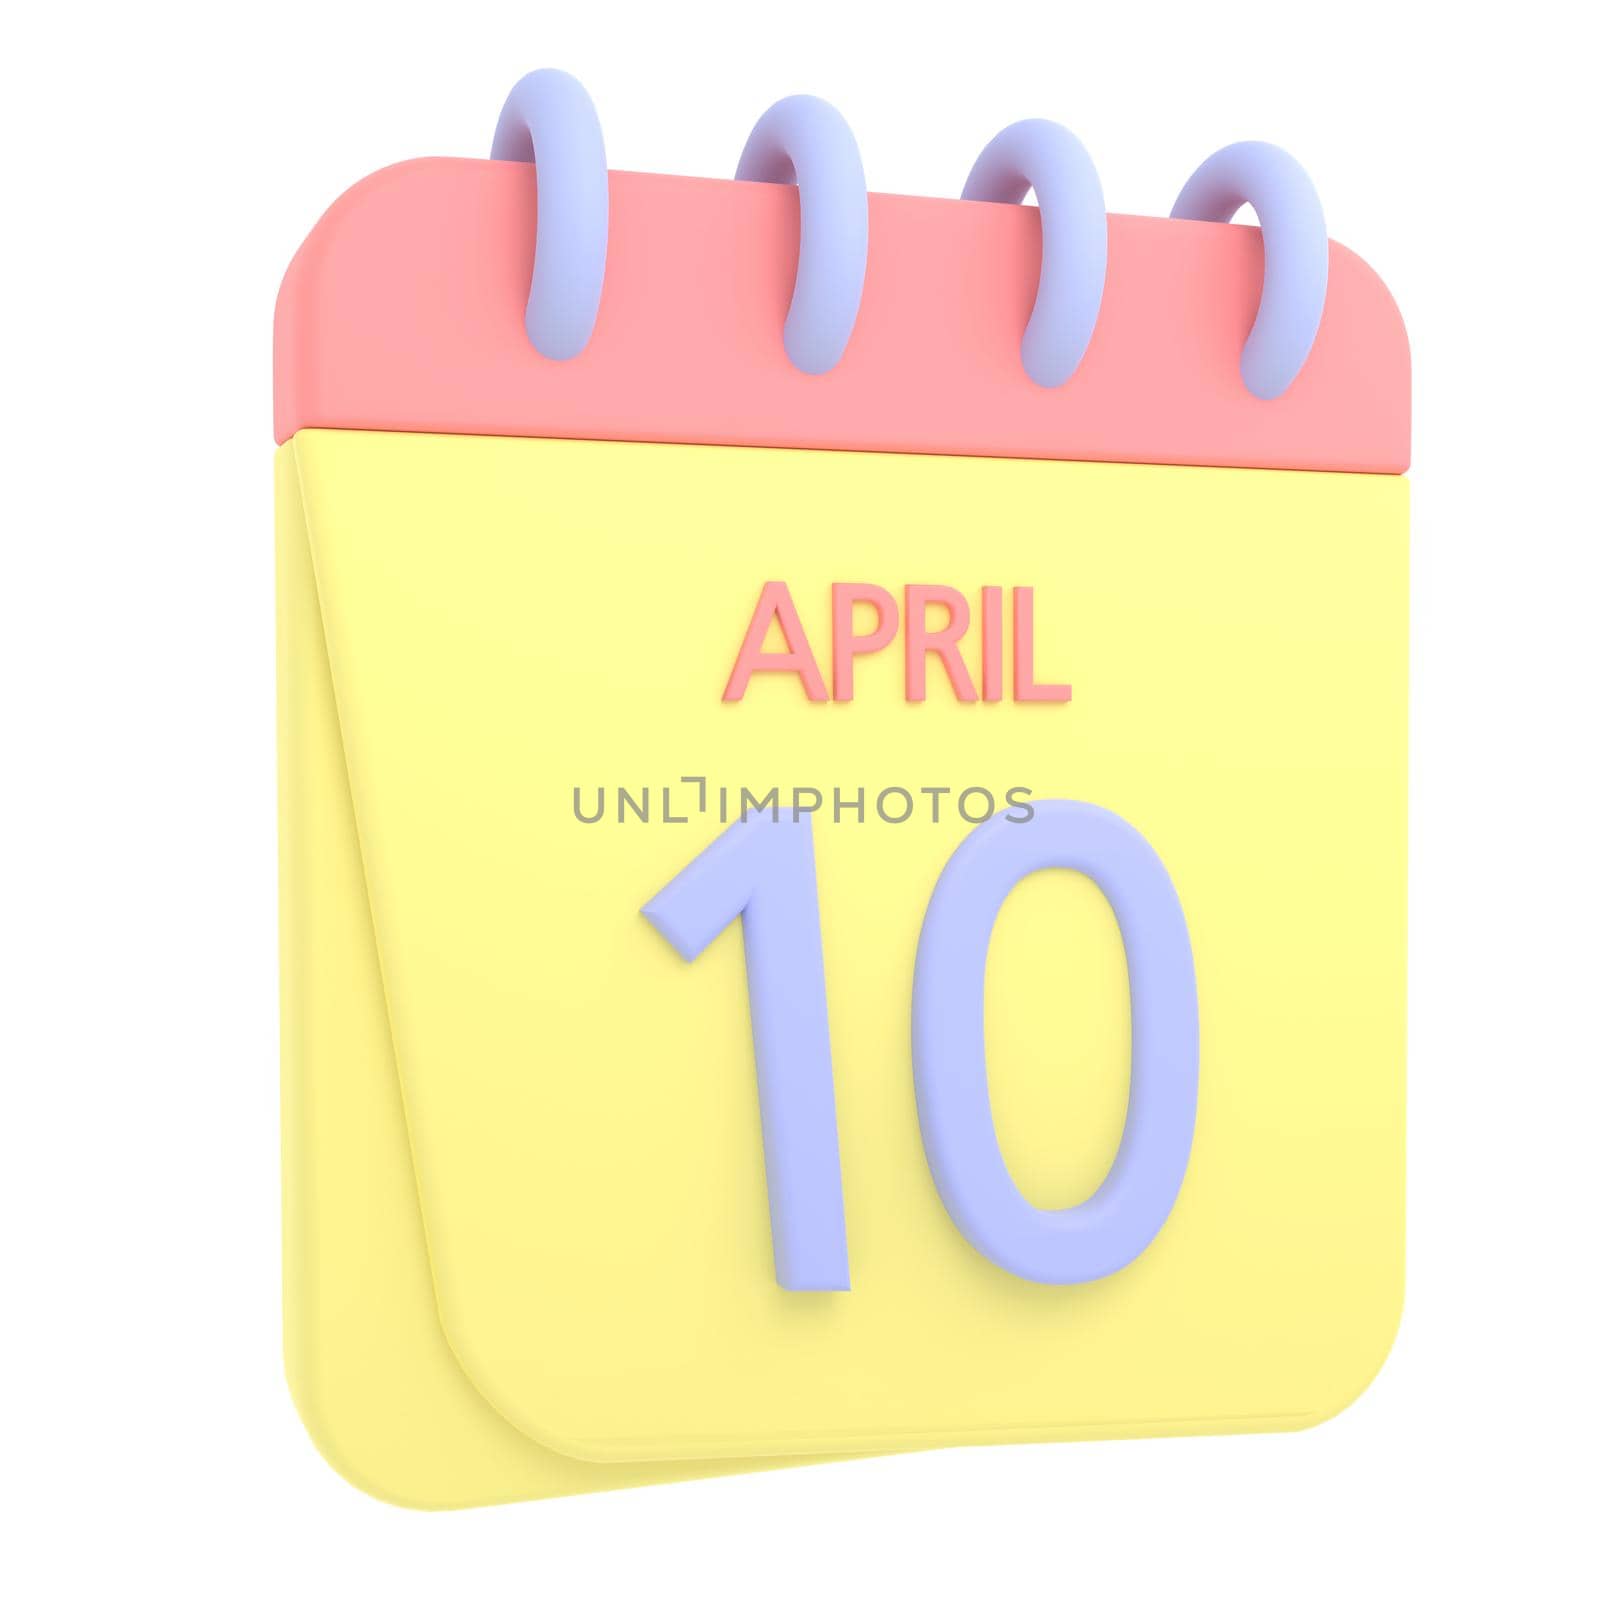 10th April 3D calendar icon. Web style. High resolution image. White background